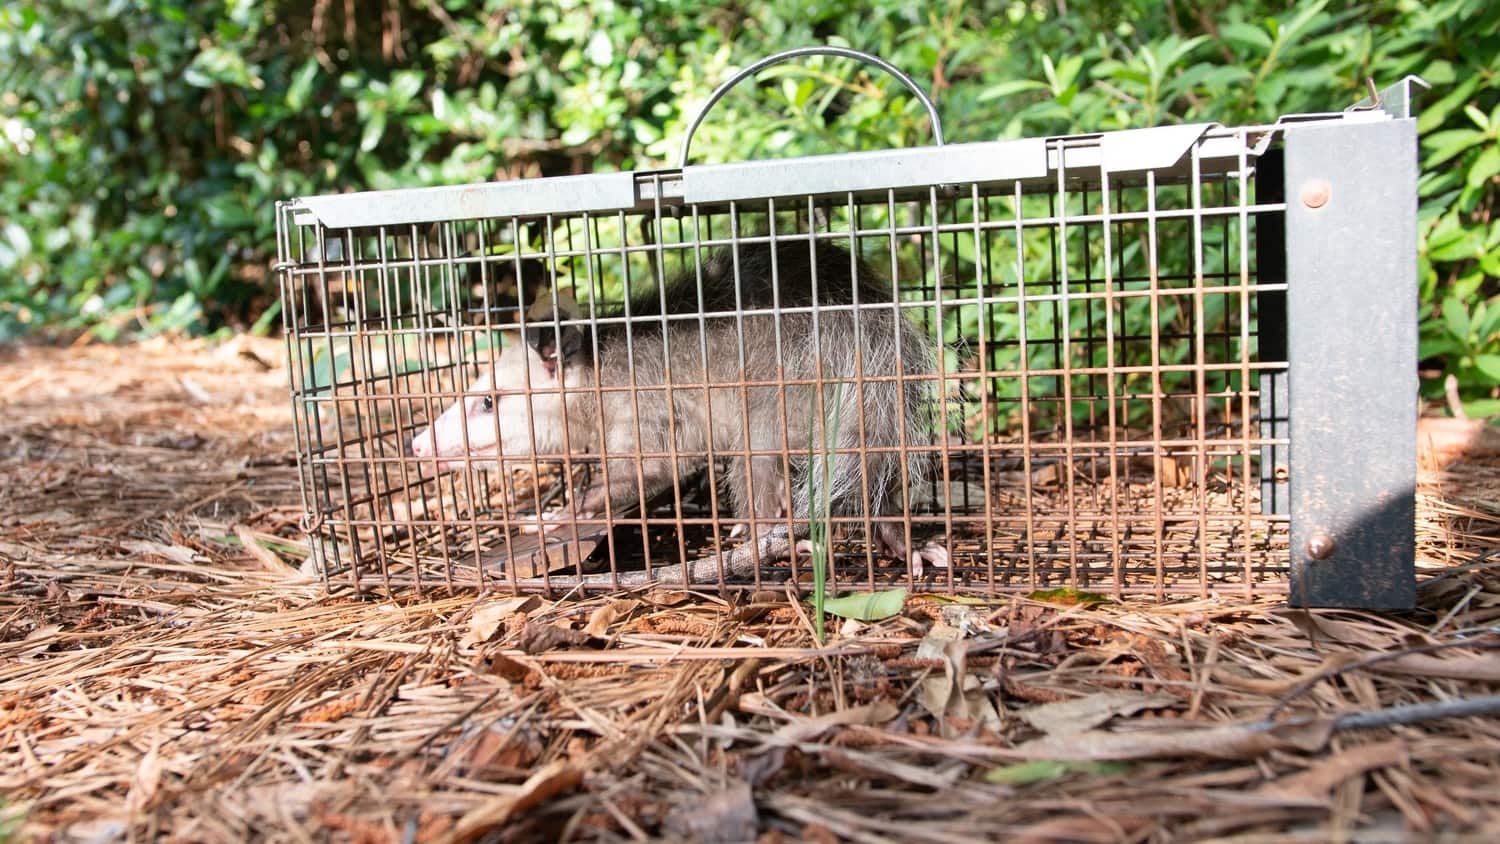 A close-up photo of a possum caught in a cage.